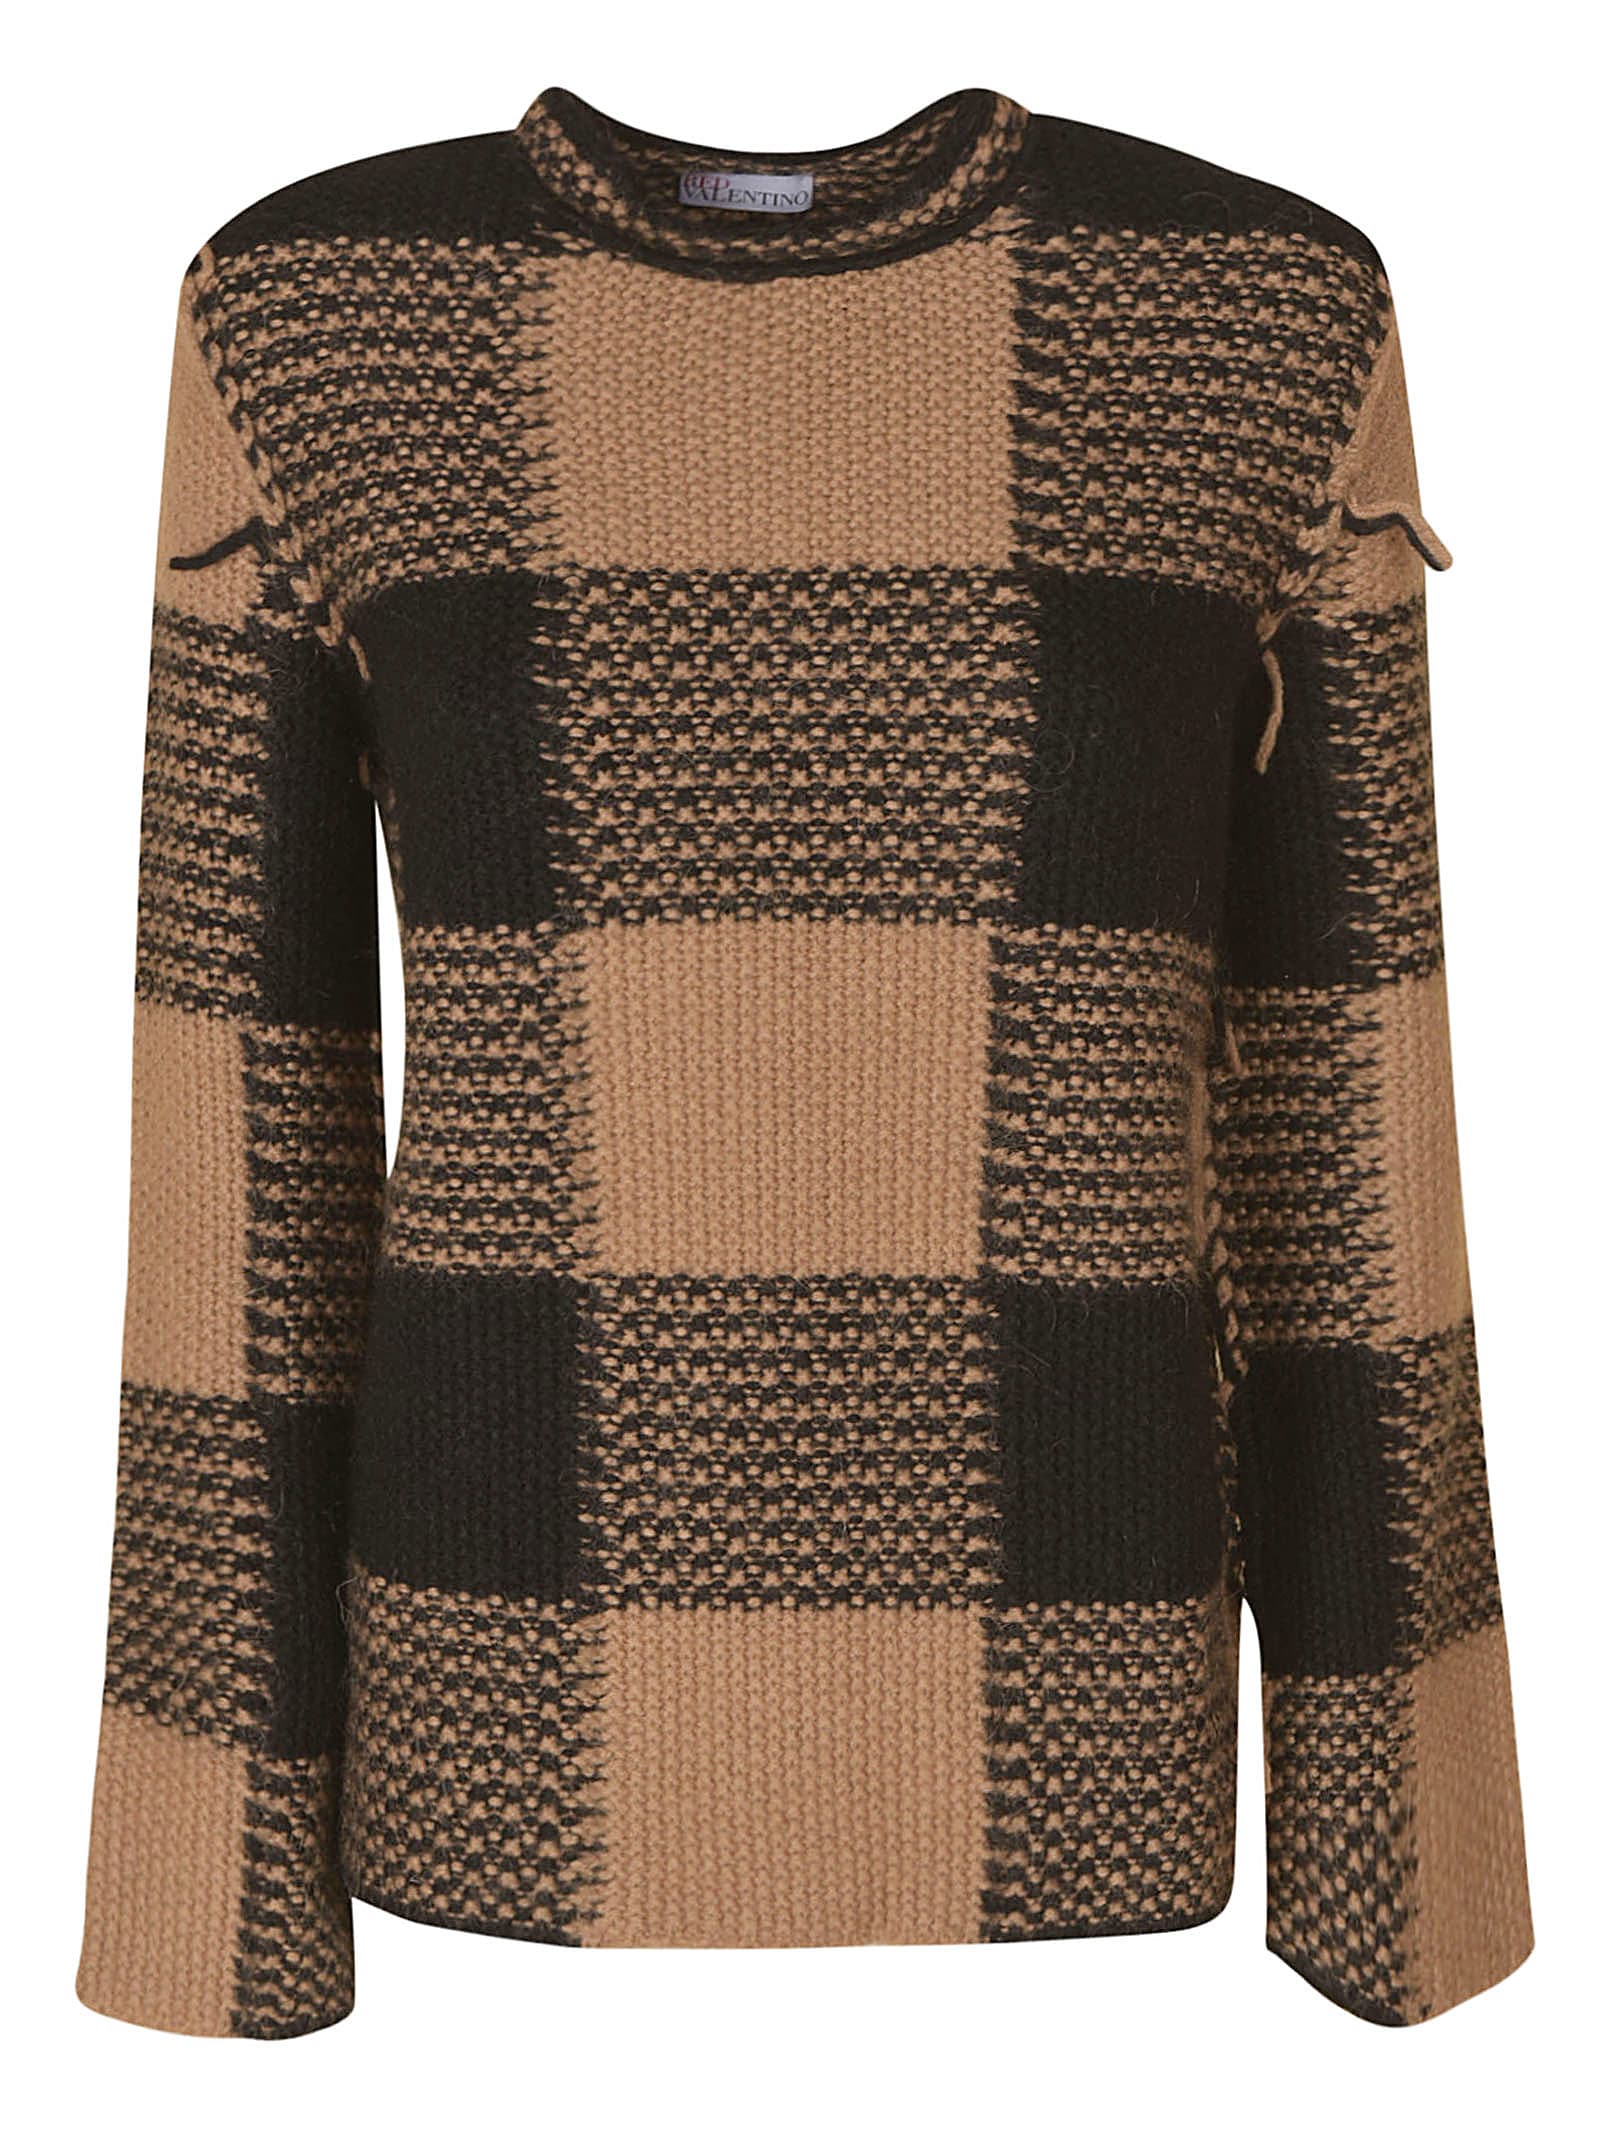 RED Valentino Large Check Pattern Knit Sweater